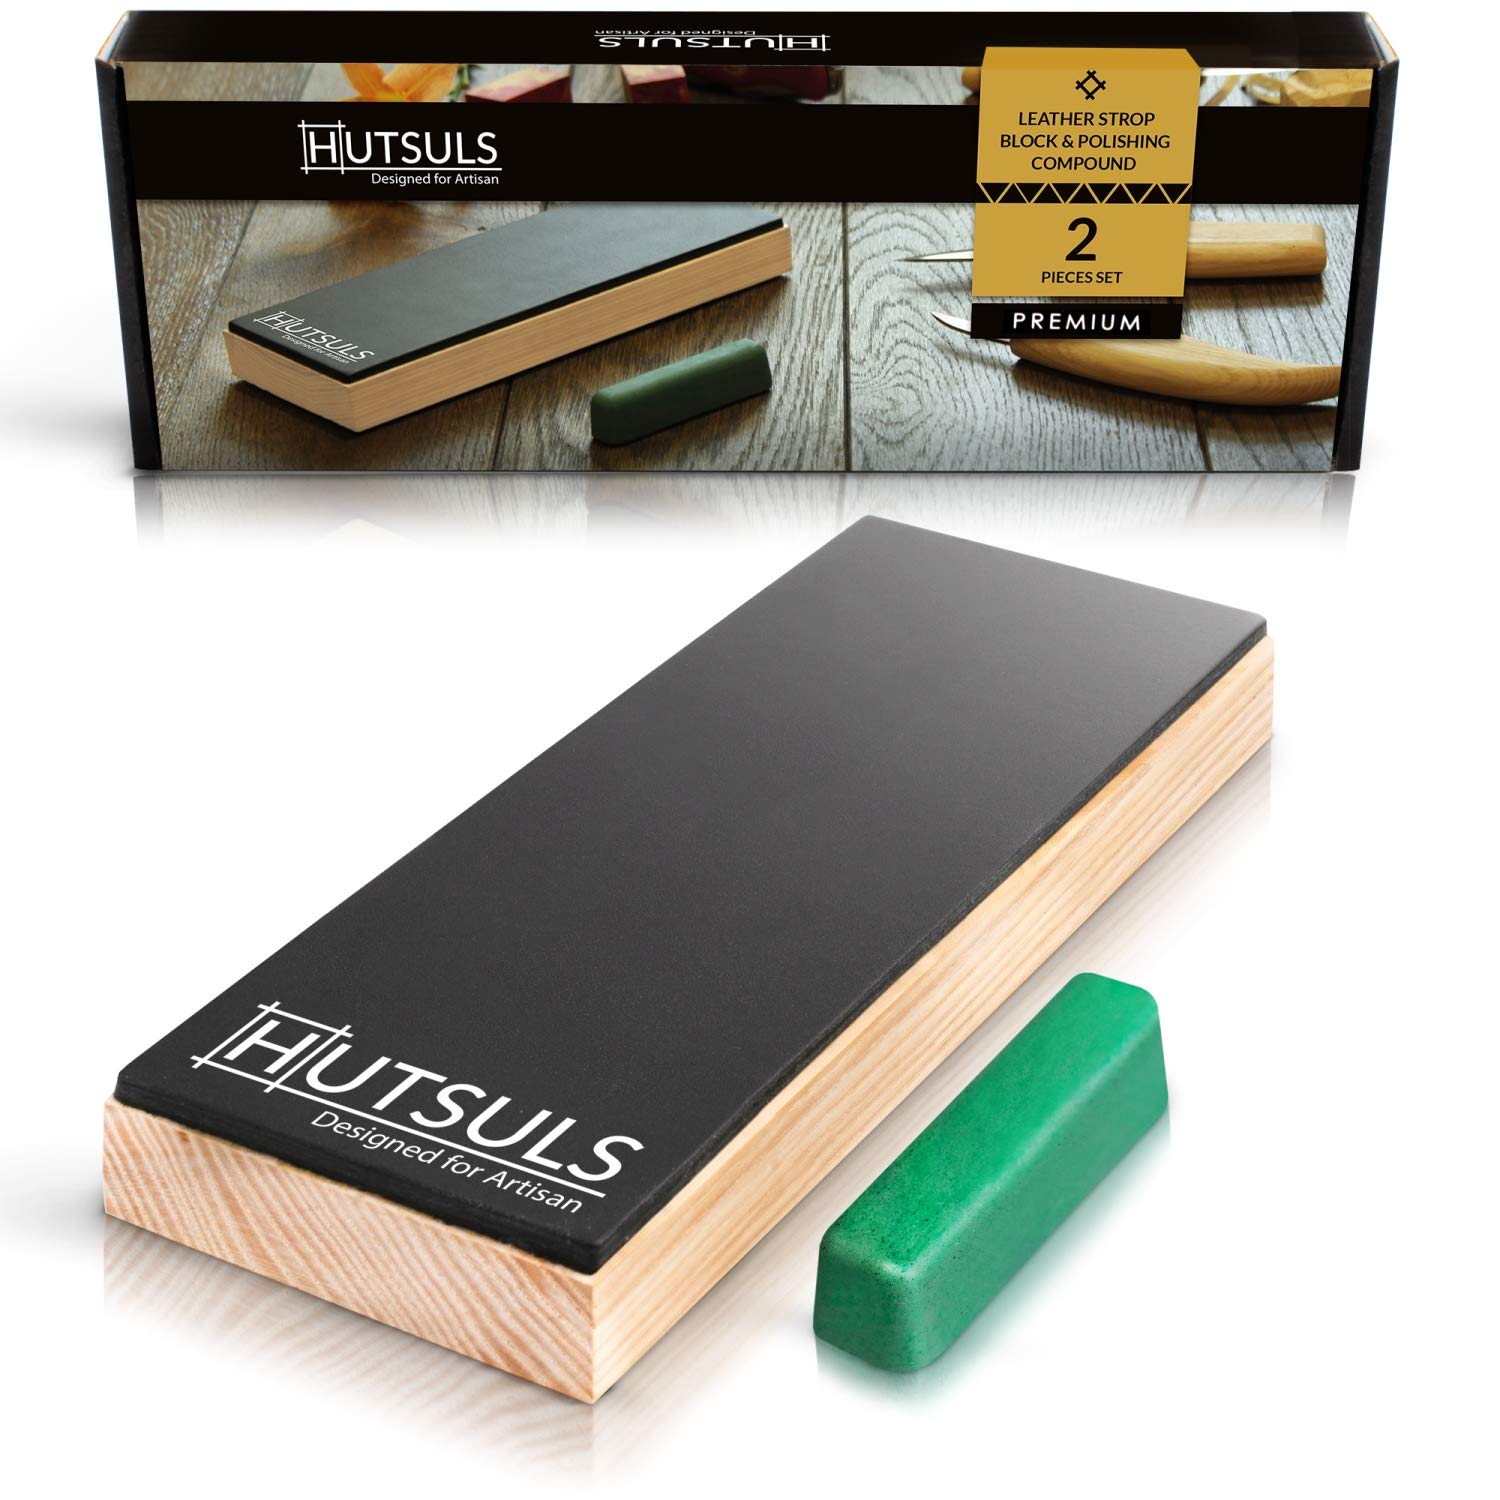 Hutsuls Leather Strop Block with Compound - Get Razor-Sharp Edges with Knife  Strop Kit Easy to